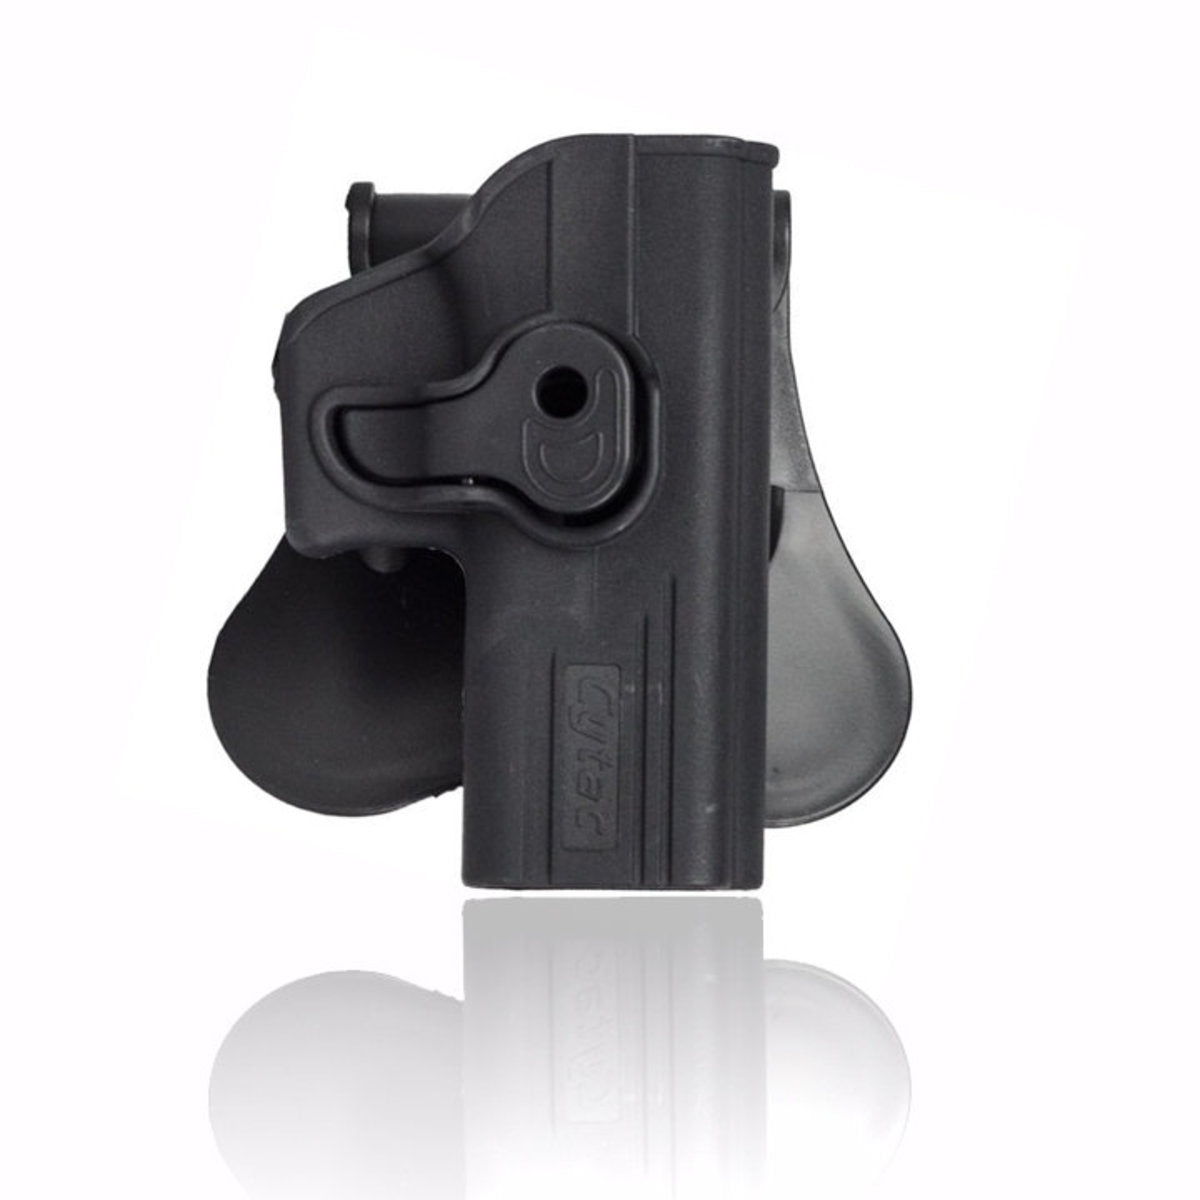 Cytac Owb Holster - Fits Glock Airsoft Pistols